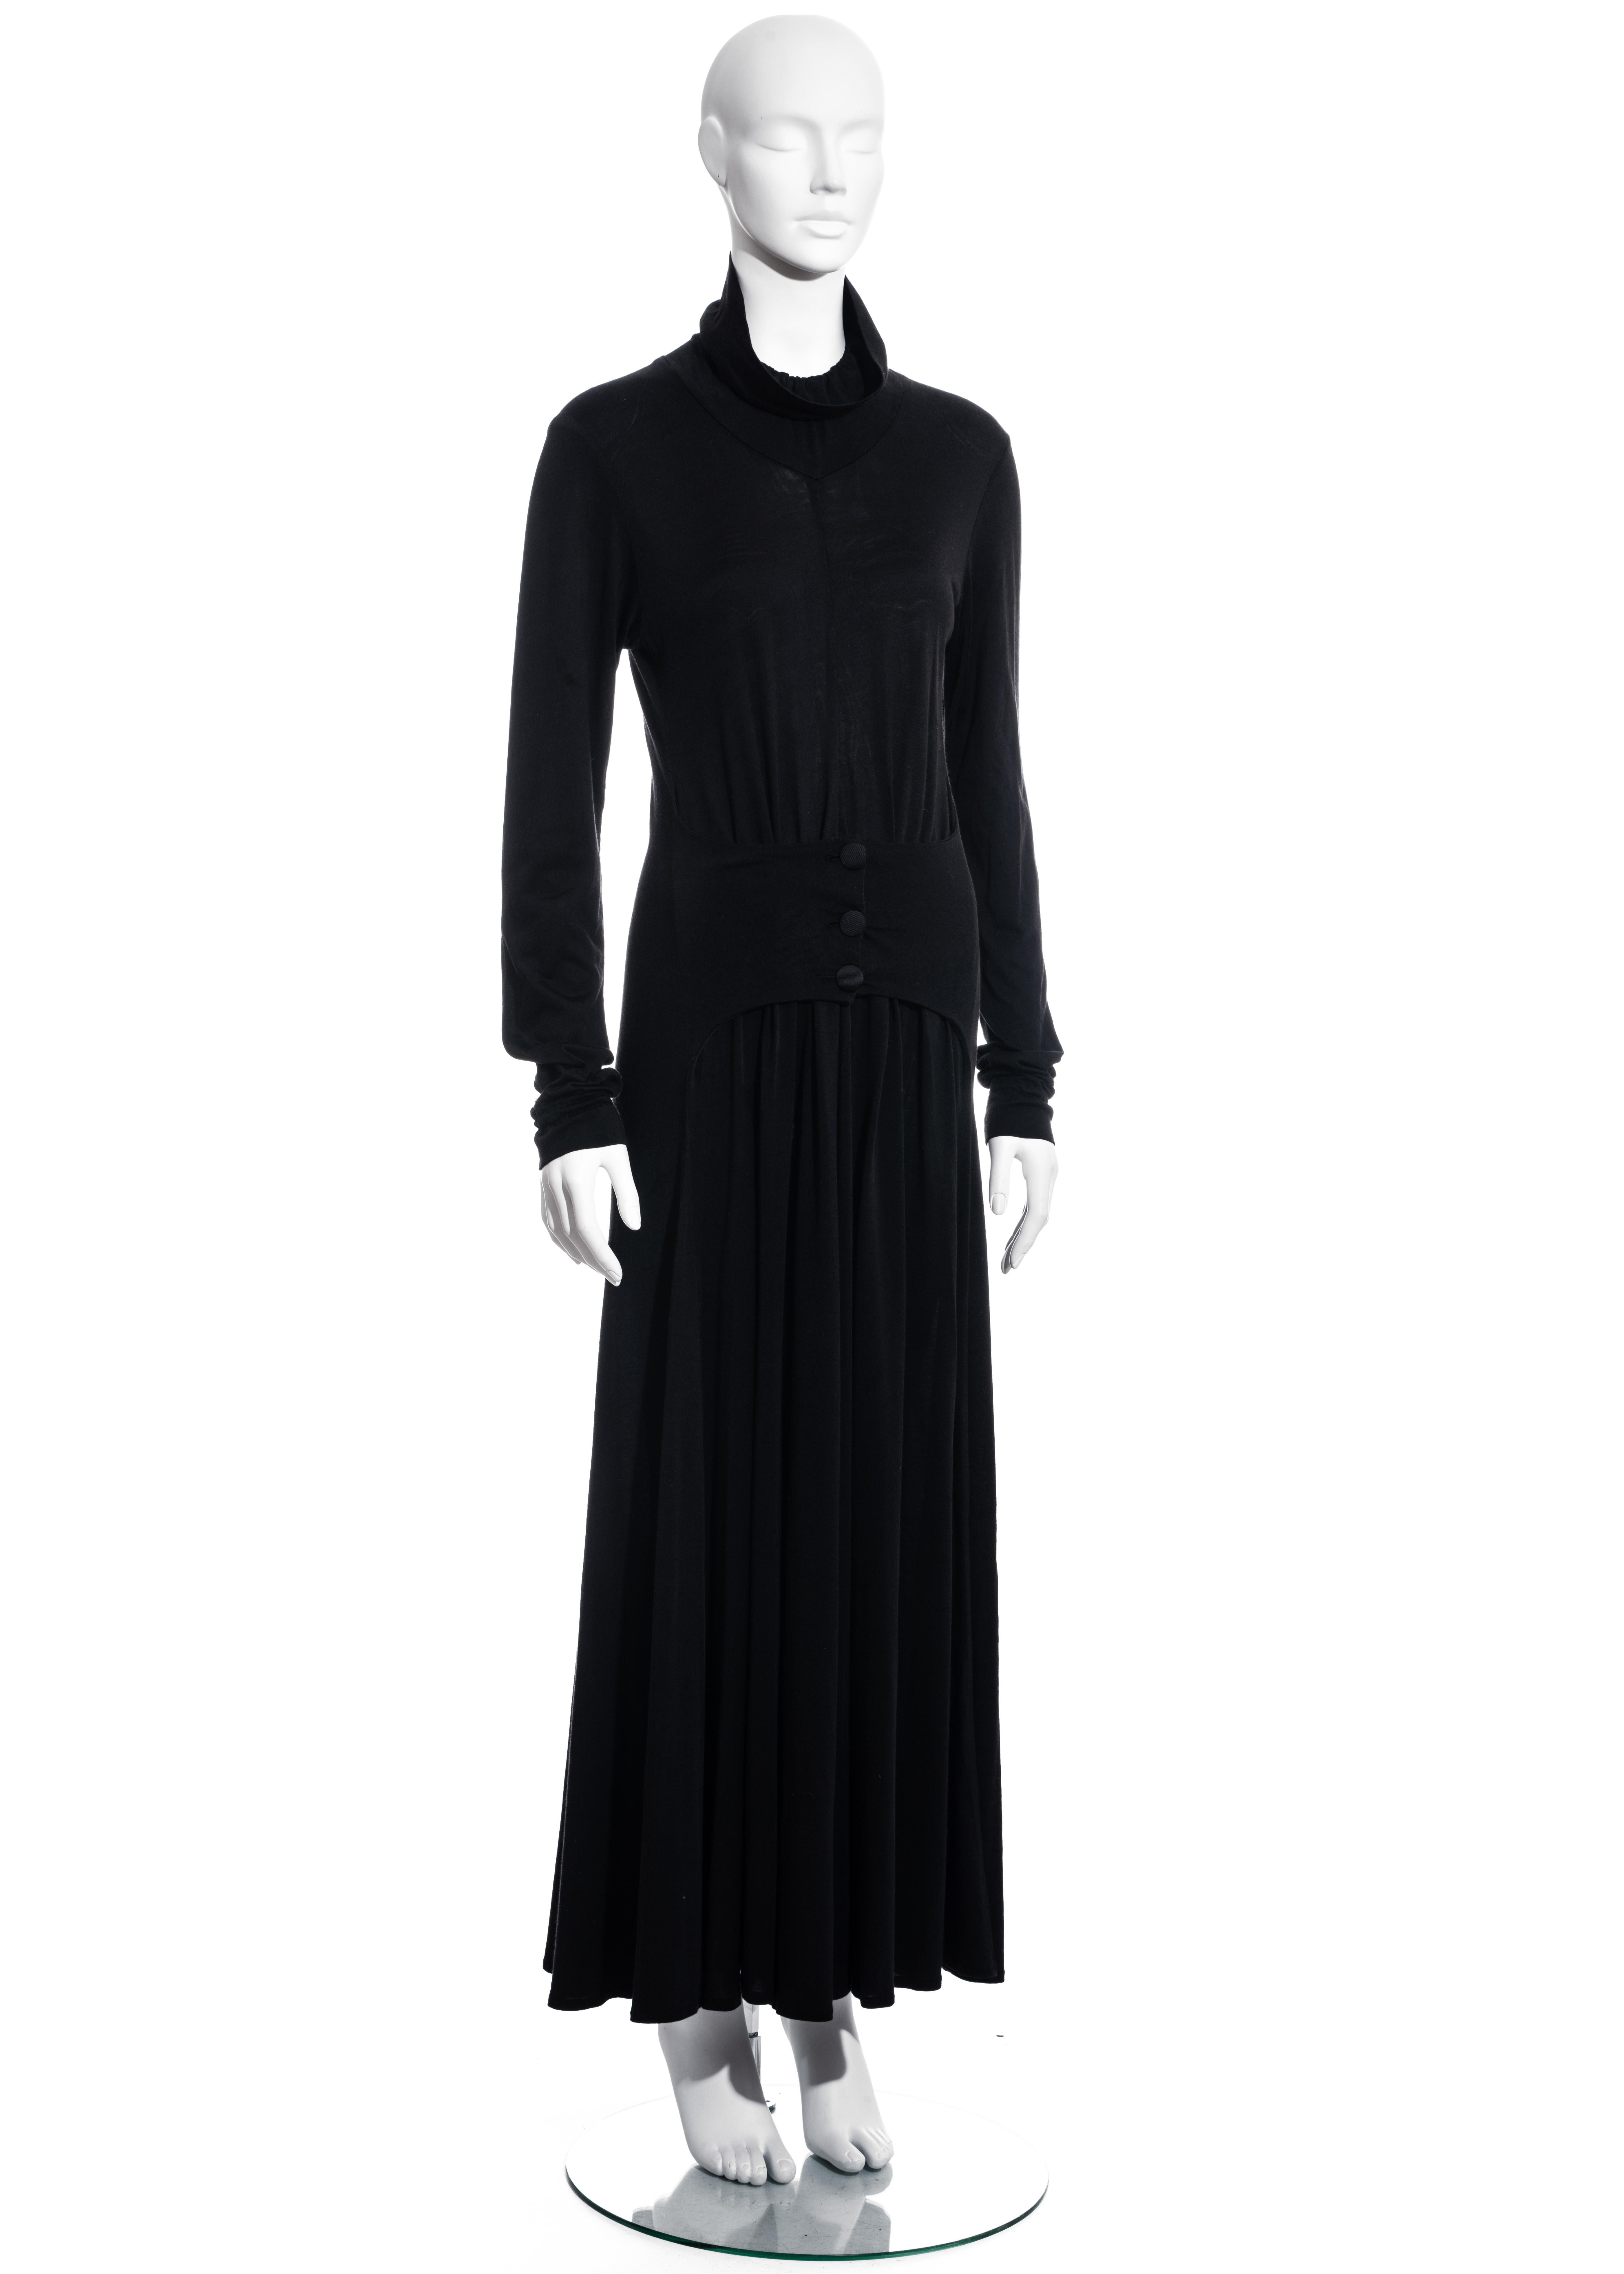 ▪ BodyMap black jersey maxi dress
▪ 52% Viscose, 48% Cotton
▪ Three front button fastenings belted at the hips 
▪ High neck with elastic collar 
▪ Size Medium
▪ c. 1980s
